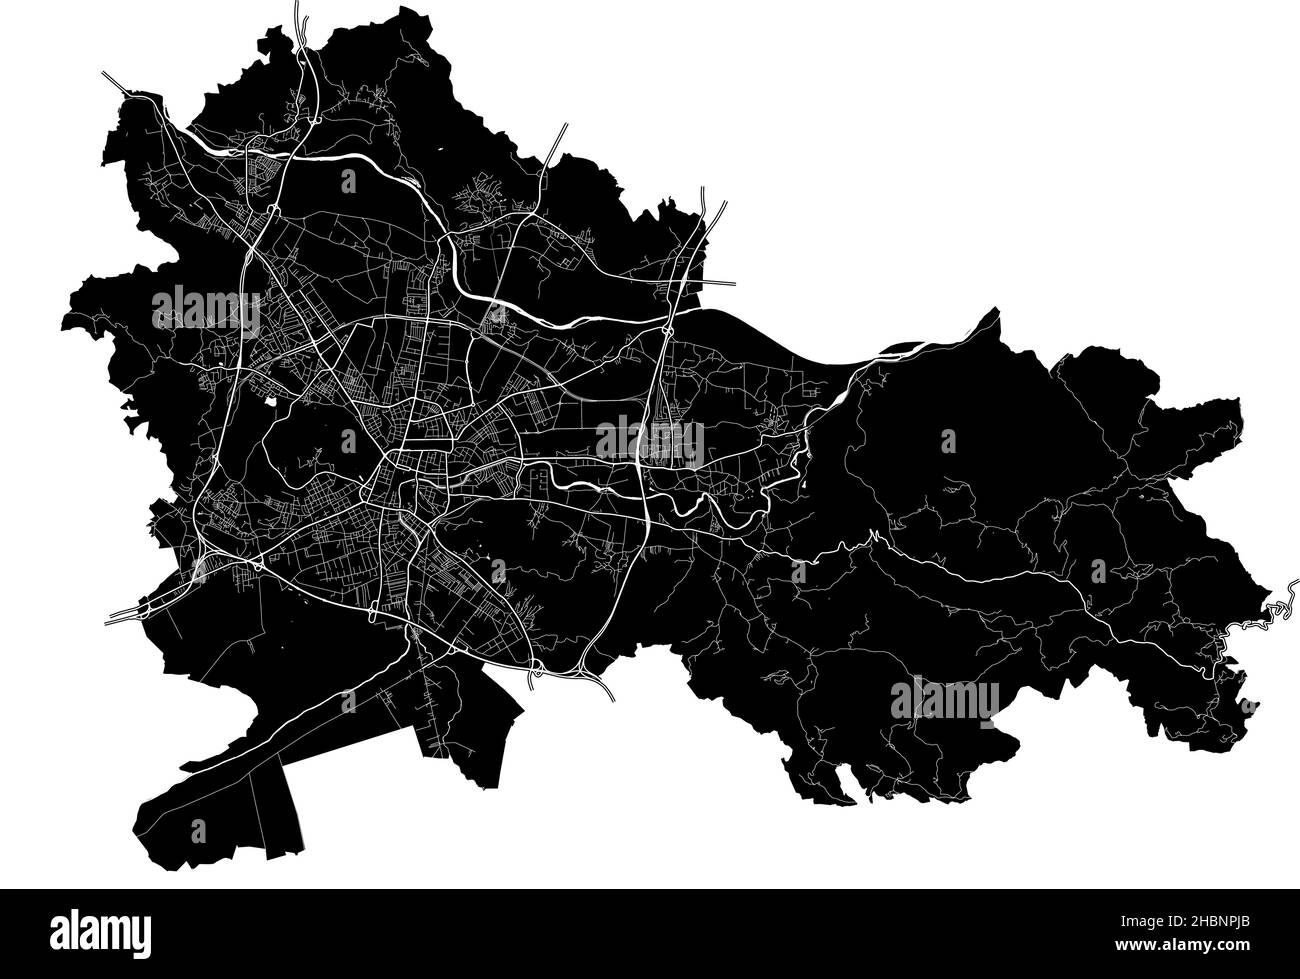 Ljubljana, Slovenia, high resolution vector map with city boundaries, and editable paths. The city map was drawn with white areas and lines for main r Stock Vector